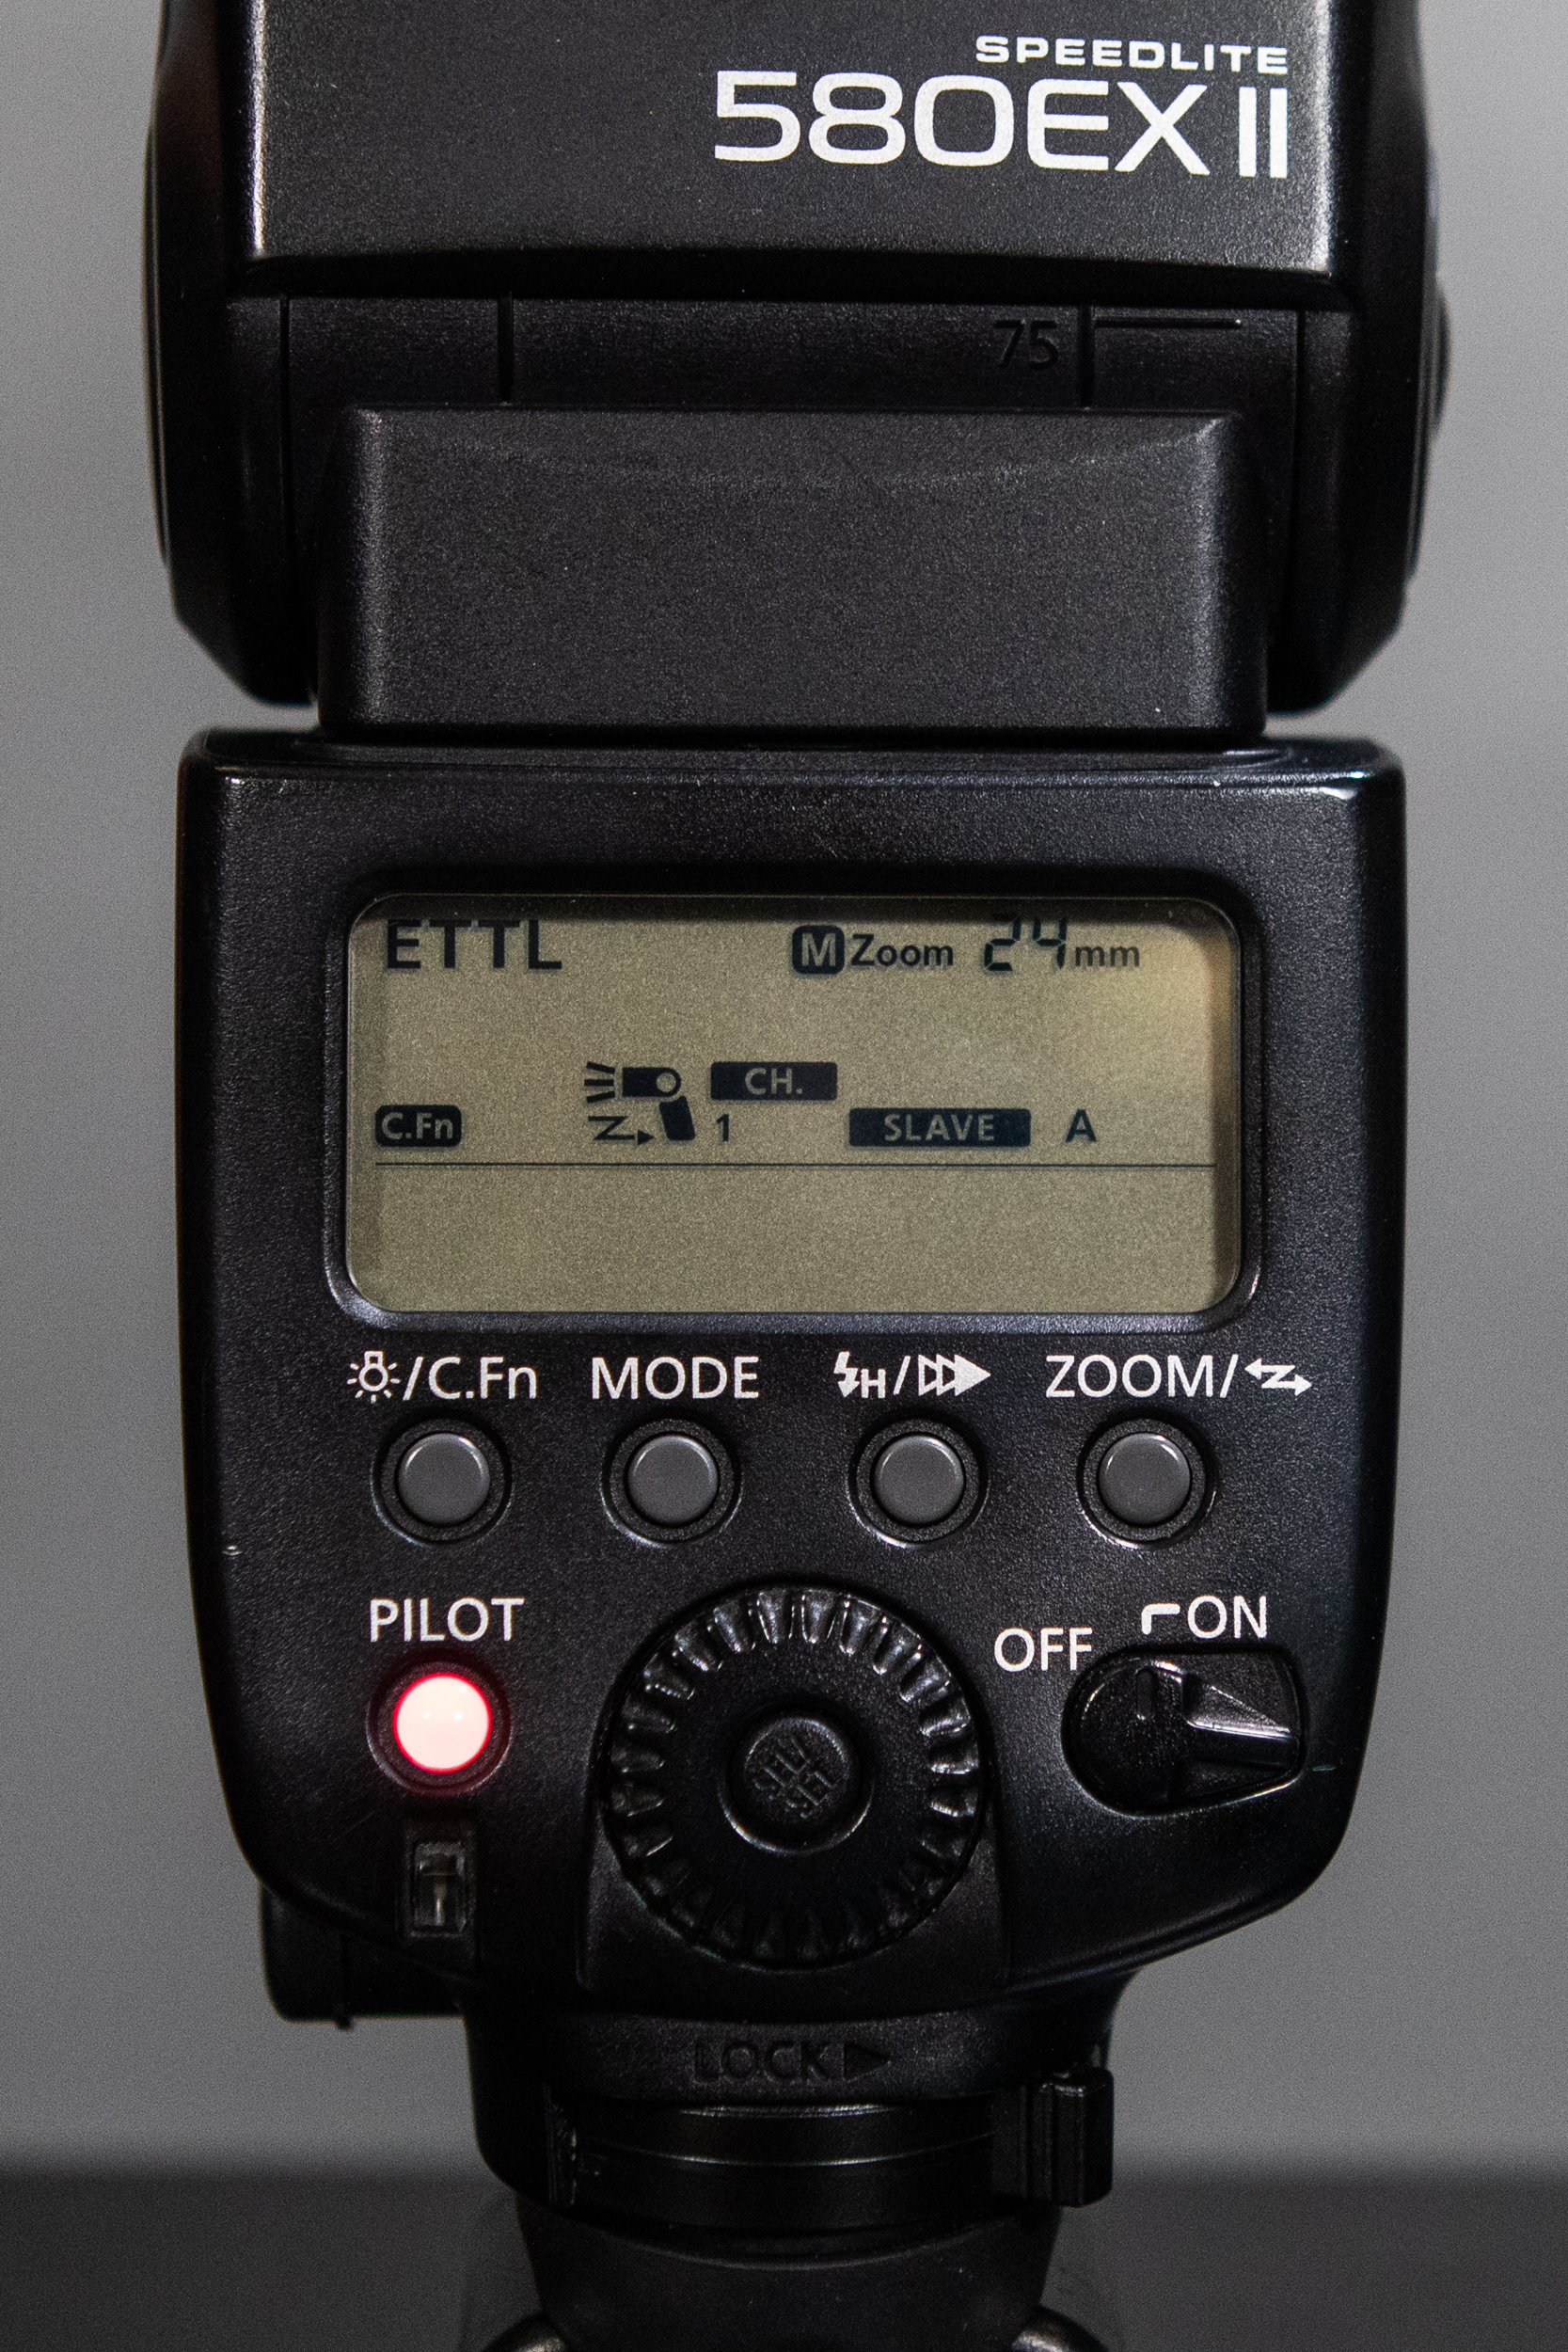 Using a Canon Speedlite Flash with a Sony A7